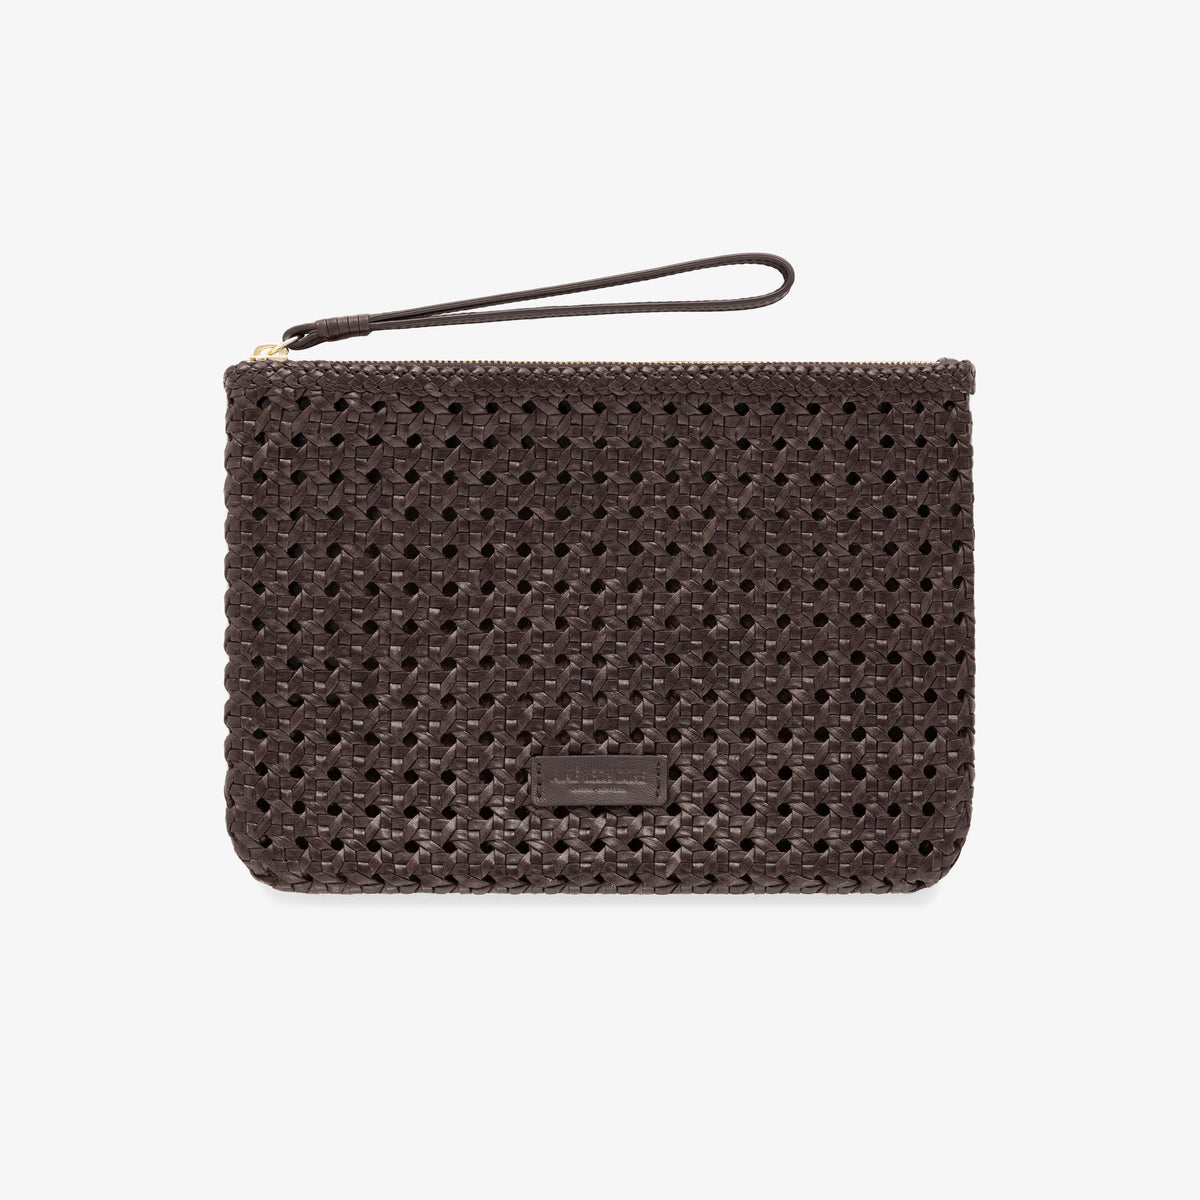 Woven Leather Pouch at AimeLeonDore.com